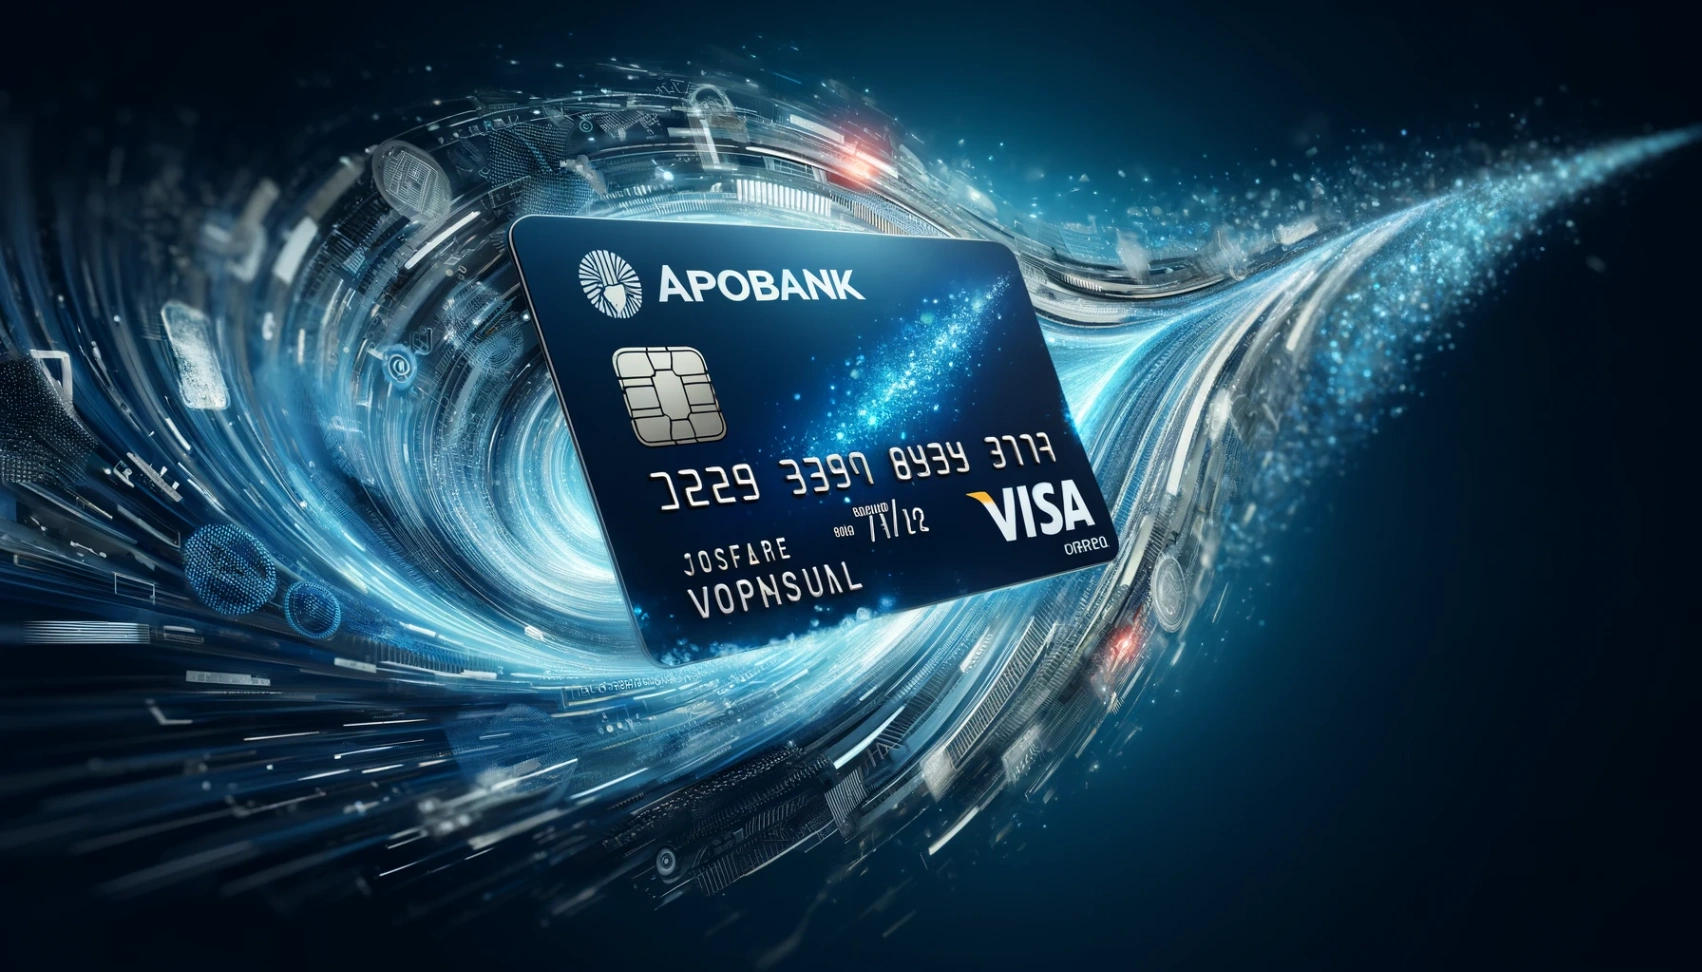 Apobank Visa Card: How to Apply Online Effectively